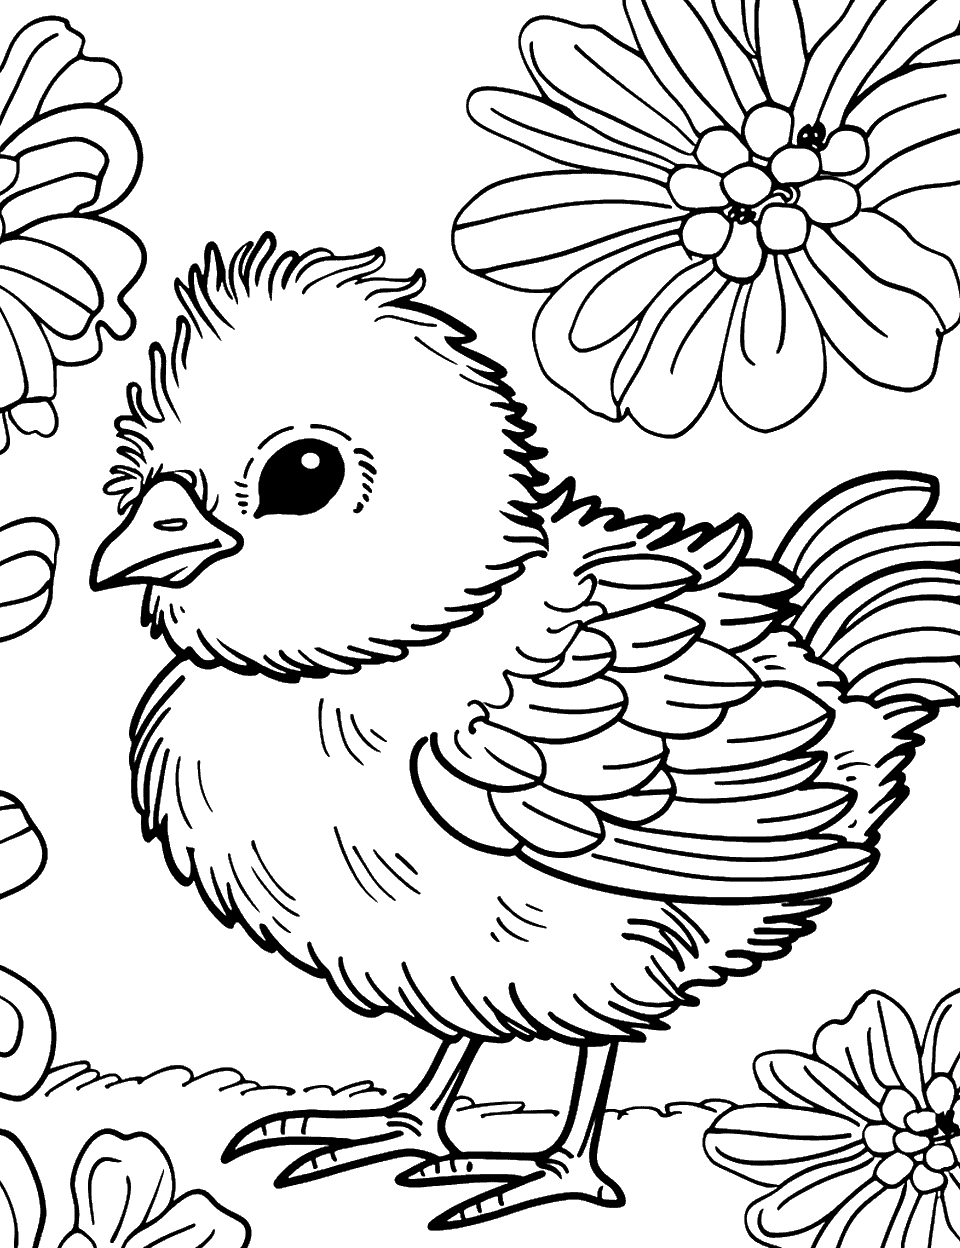 Chick Amongst Flowers Chicken Coloring Page - A tiny chick standing amongst large flowers, exploring the garden.